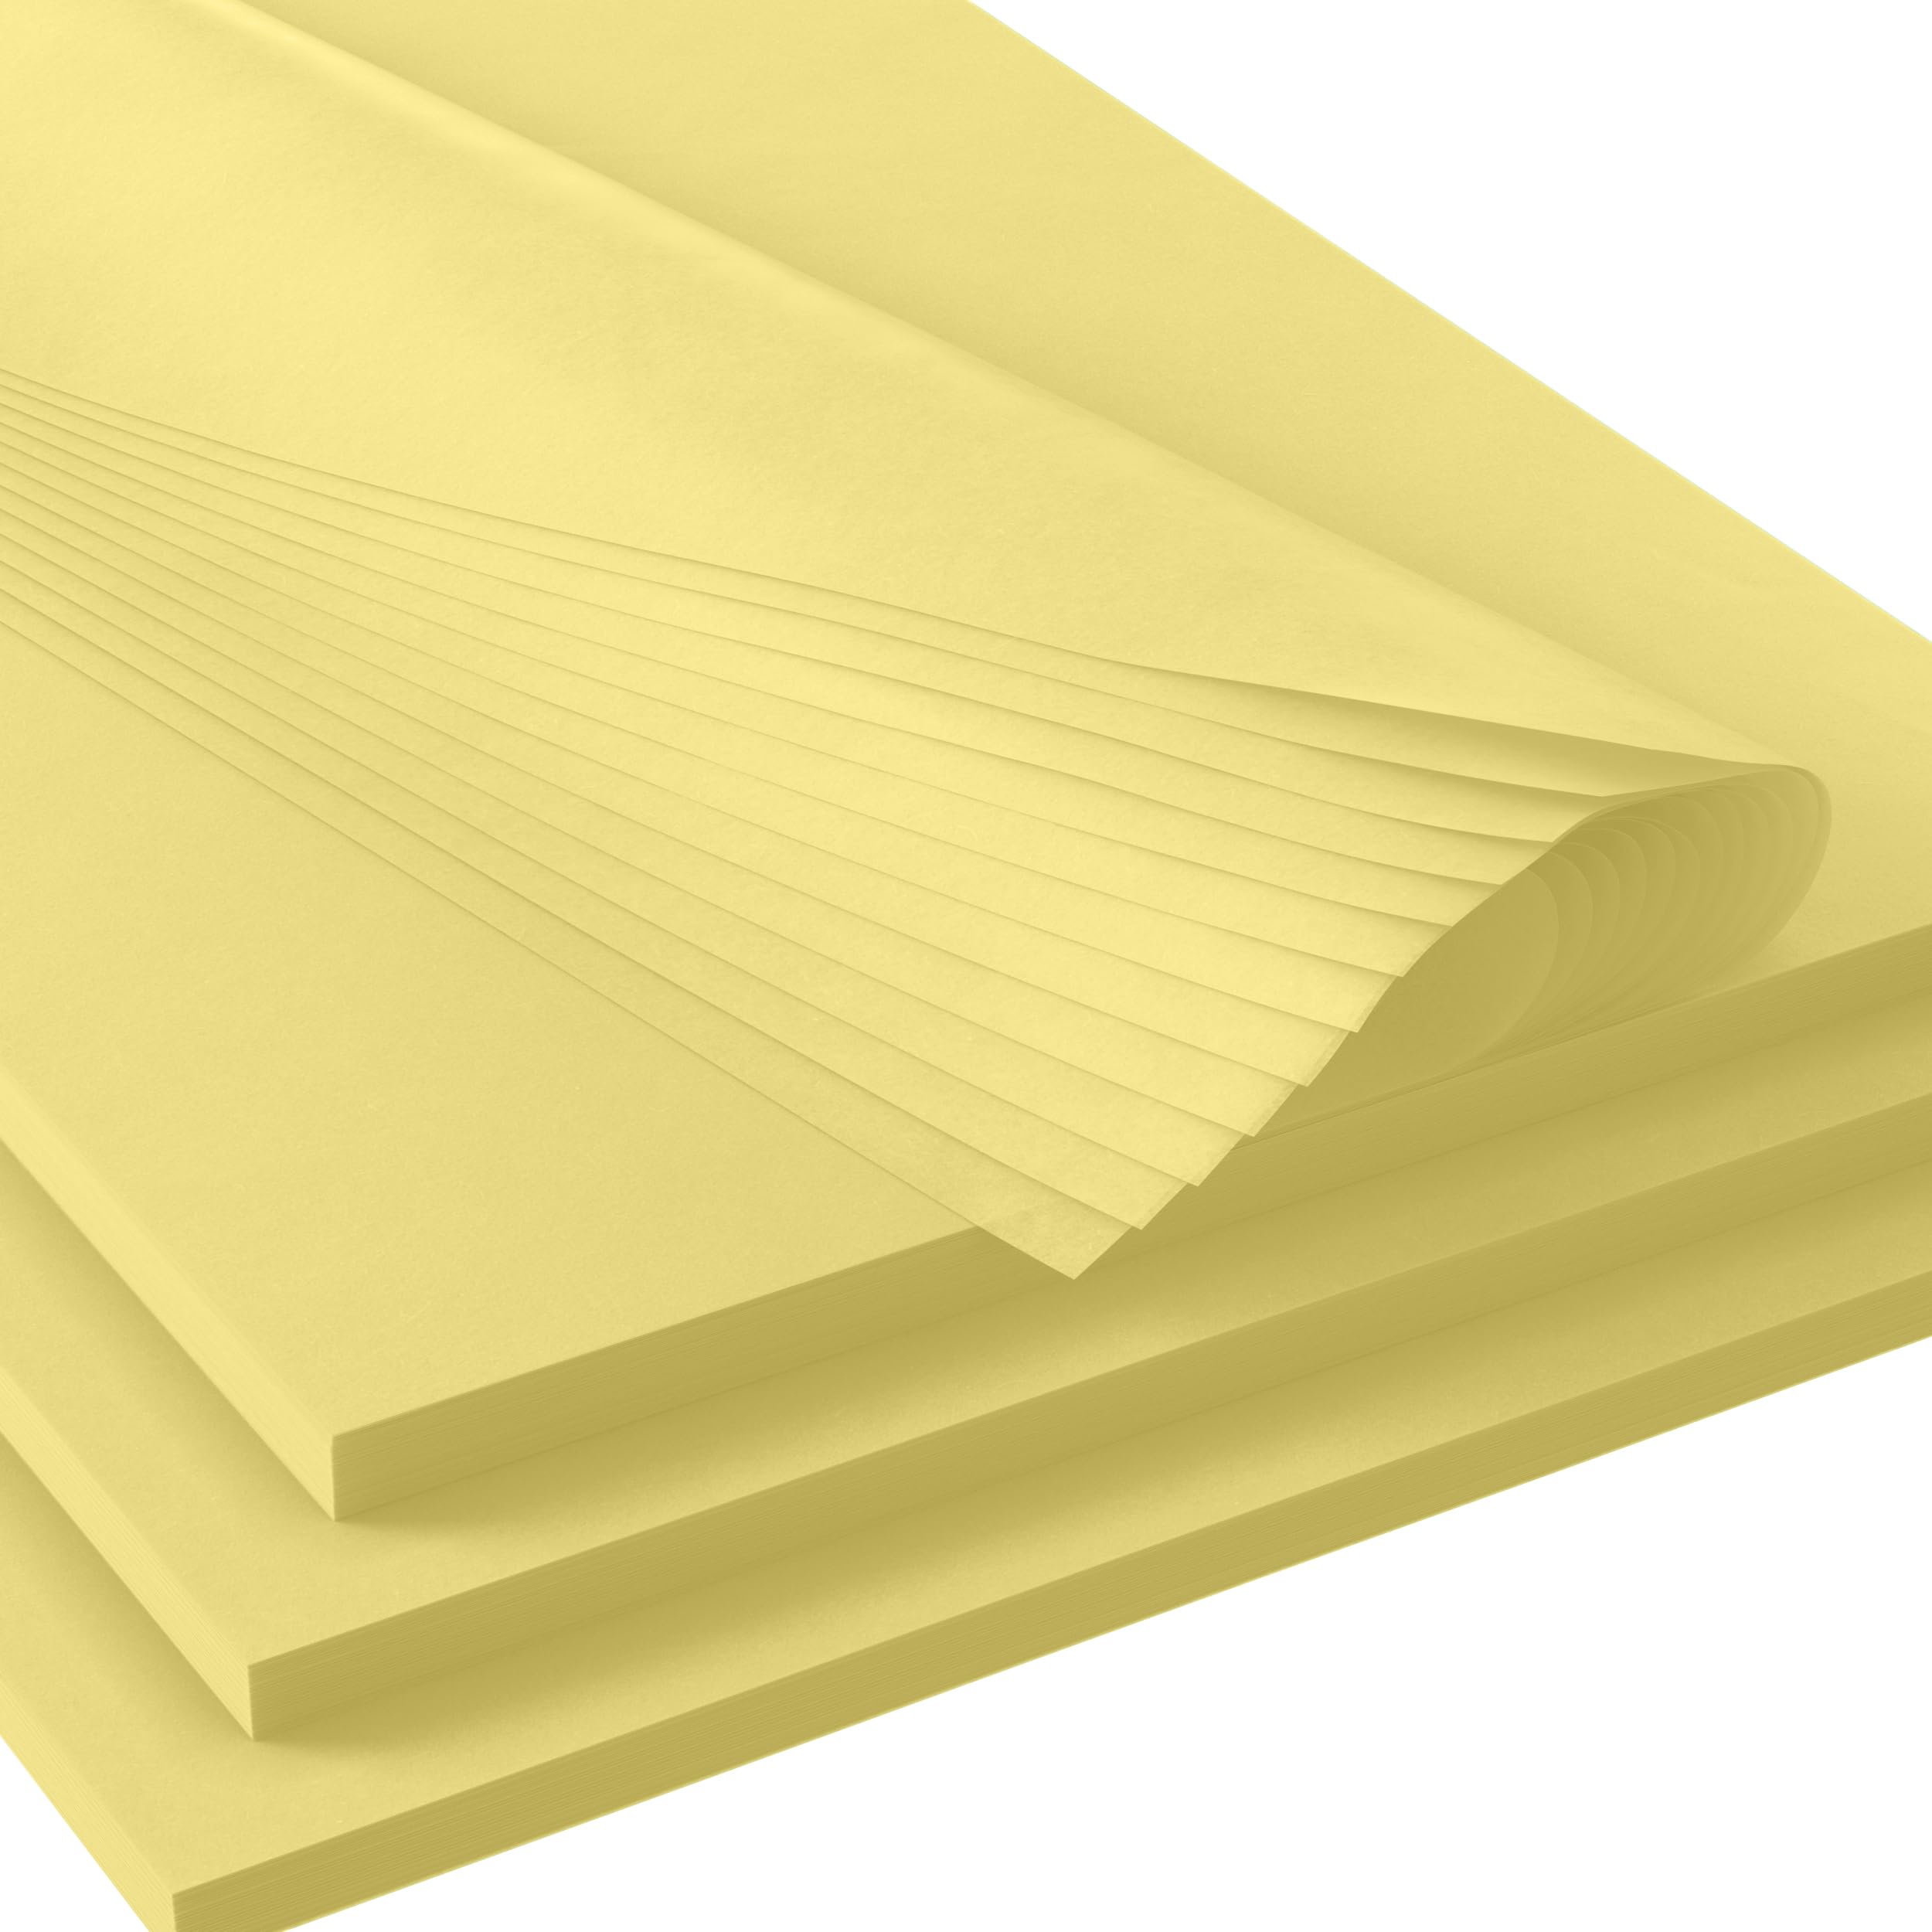 IVORY TISSUE REAM 15"X 20"- 480 SHEETS